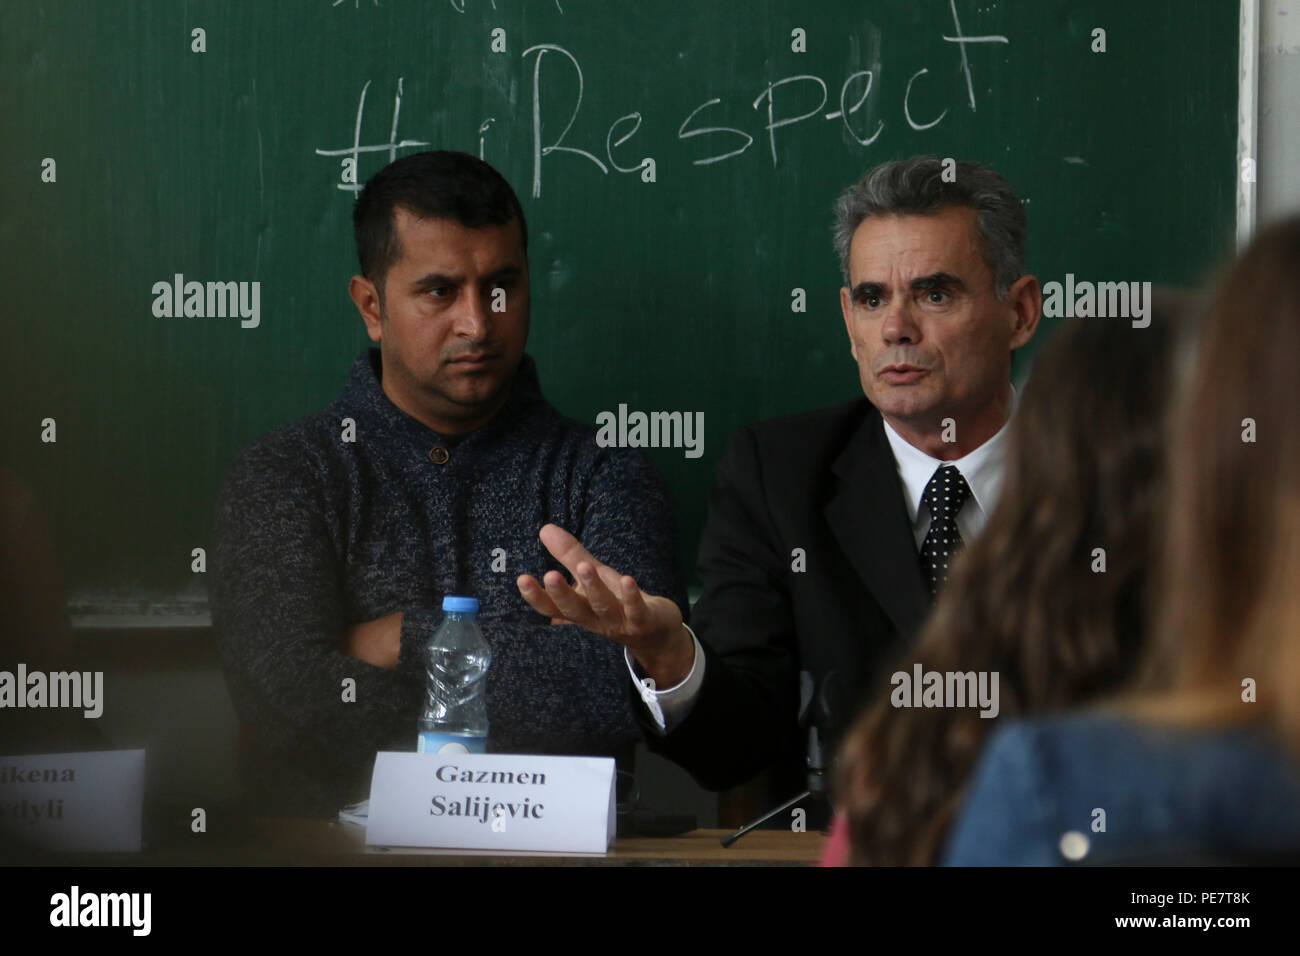 Speakers answer questions from teenagers during an Oct. 17, 2015, panel discussing discrimination and respect for others, during a Violence Free Future event in Kacanik, Kosovo. More than 100 students attended the event sponsored by the Pristina Rotary Club and participated in talks about respect for minorities, respect for women, and how everyone can make a difference in their own communities by solving problems without violence. (U.S. Army photo by Staff Sgt. Mary Junell, Multinational Battle Group-East) Stock Photo